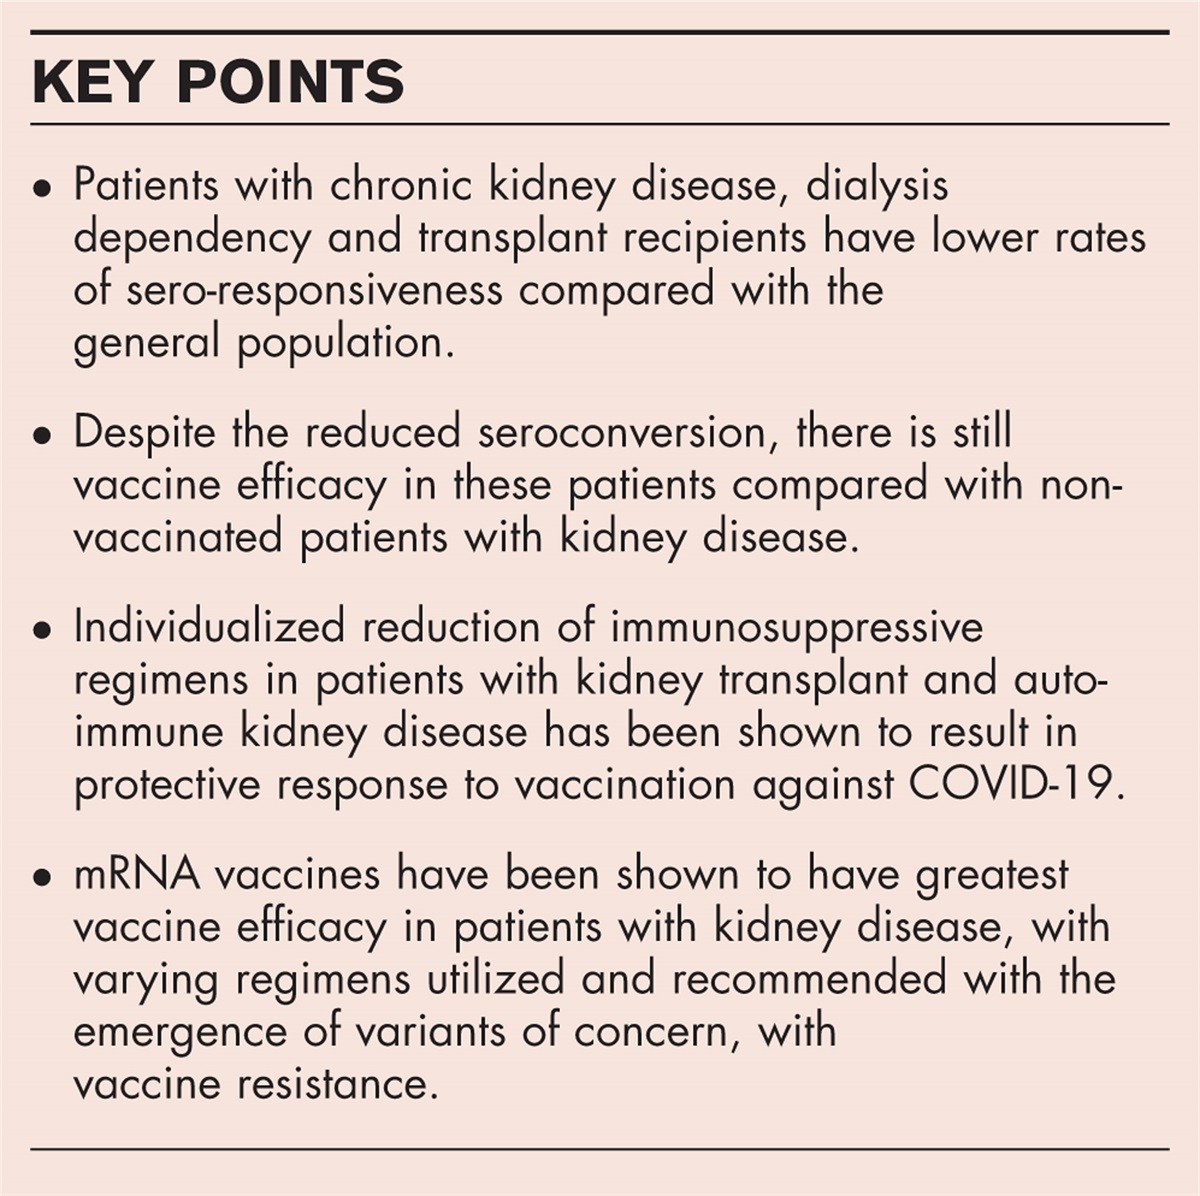 Vaccination in kidney disease: what did we learn from COVID-19 pandemic